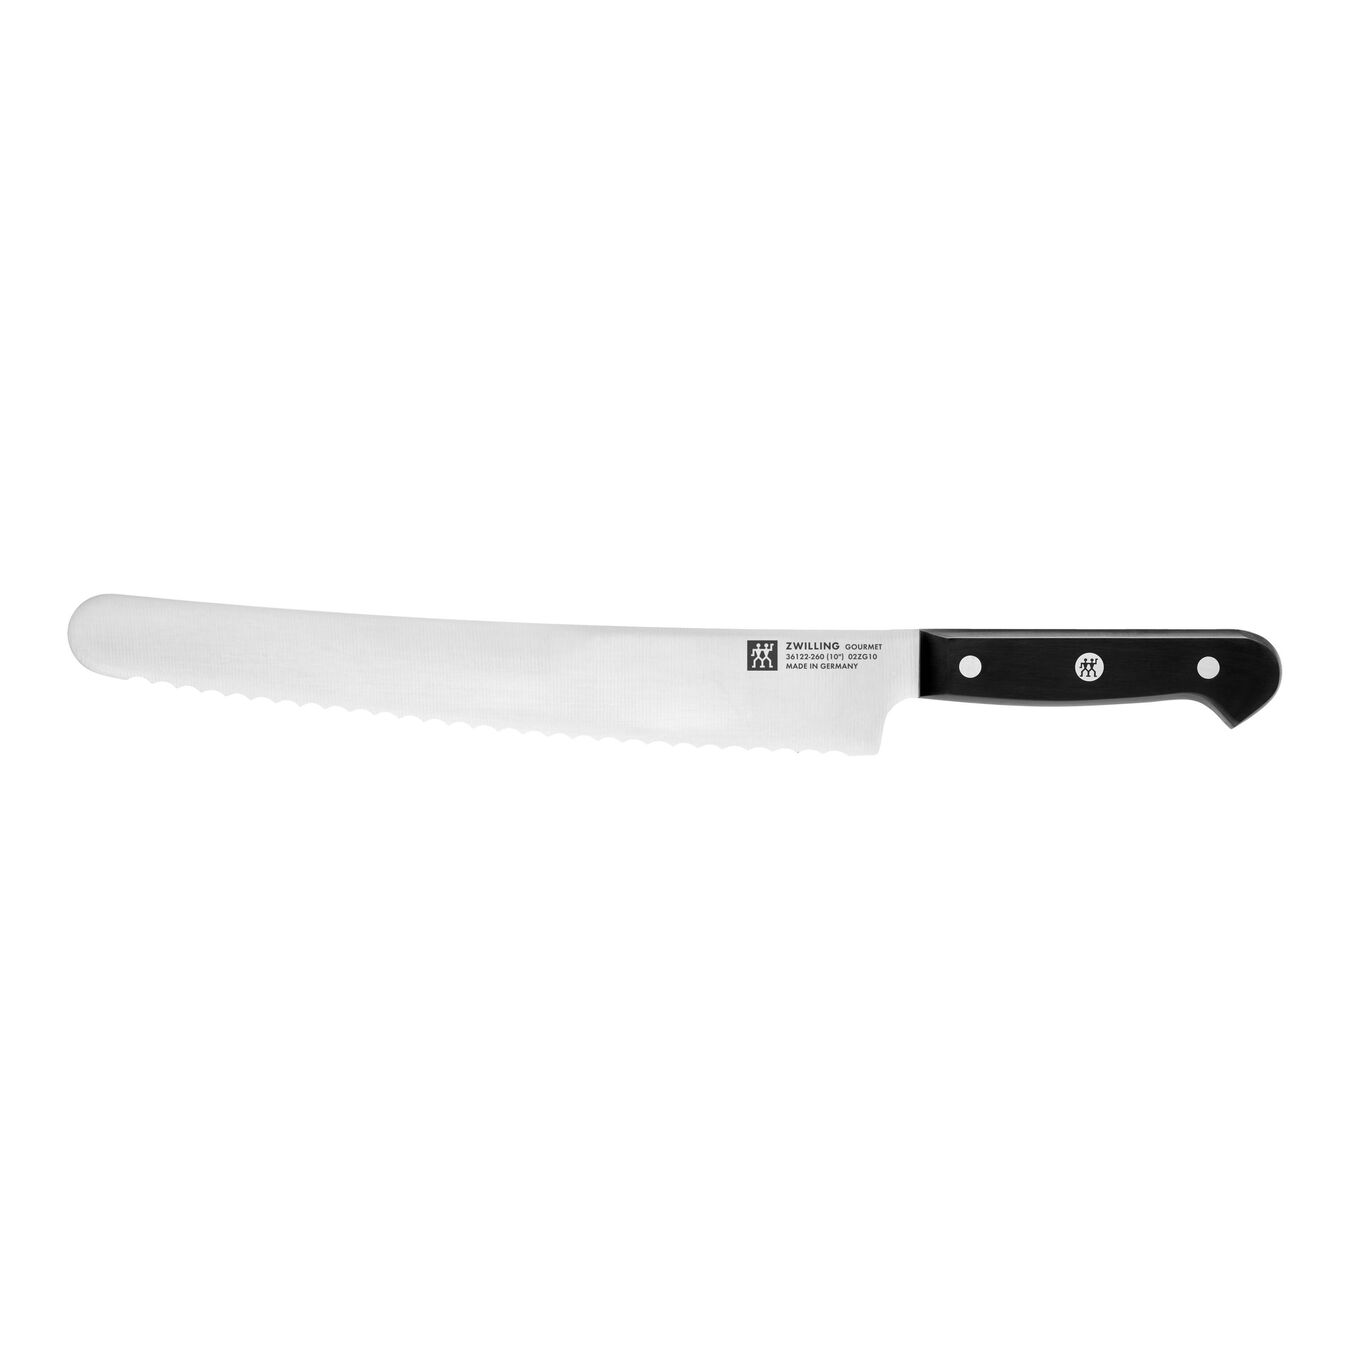 10-inch, Bread / Pastry Knife,,large 1